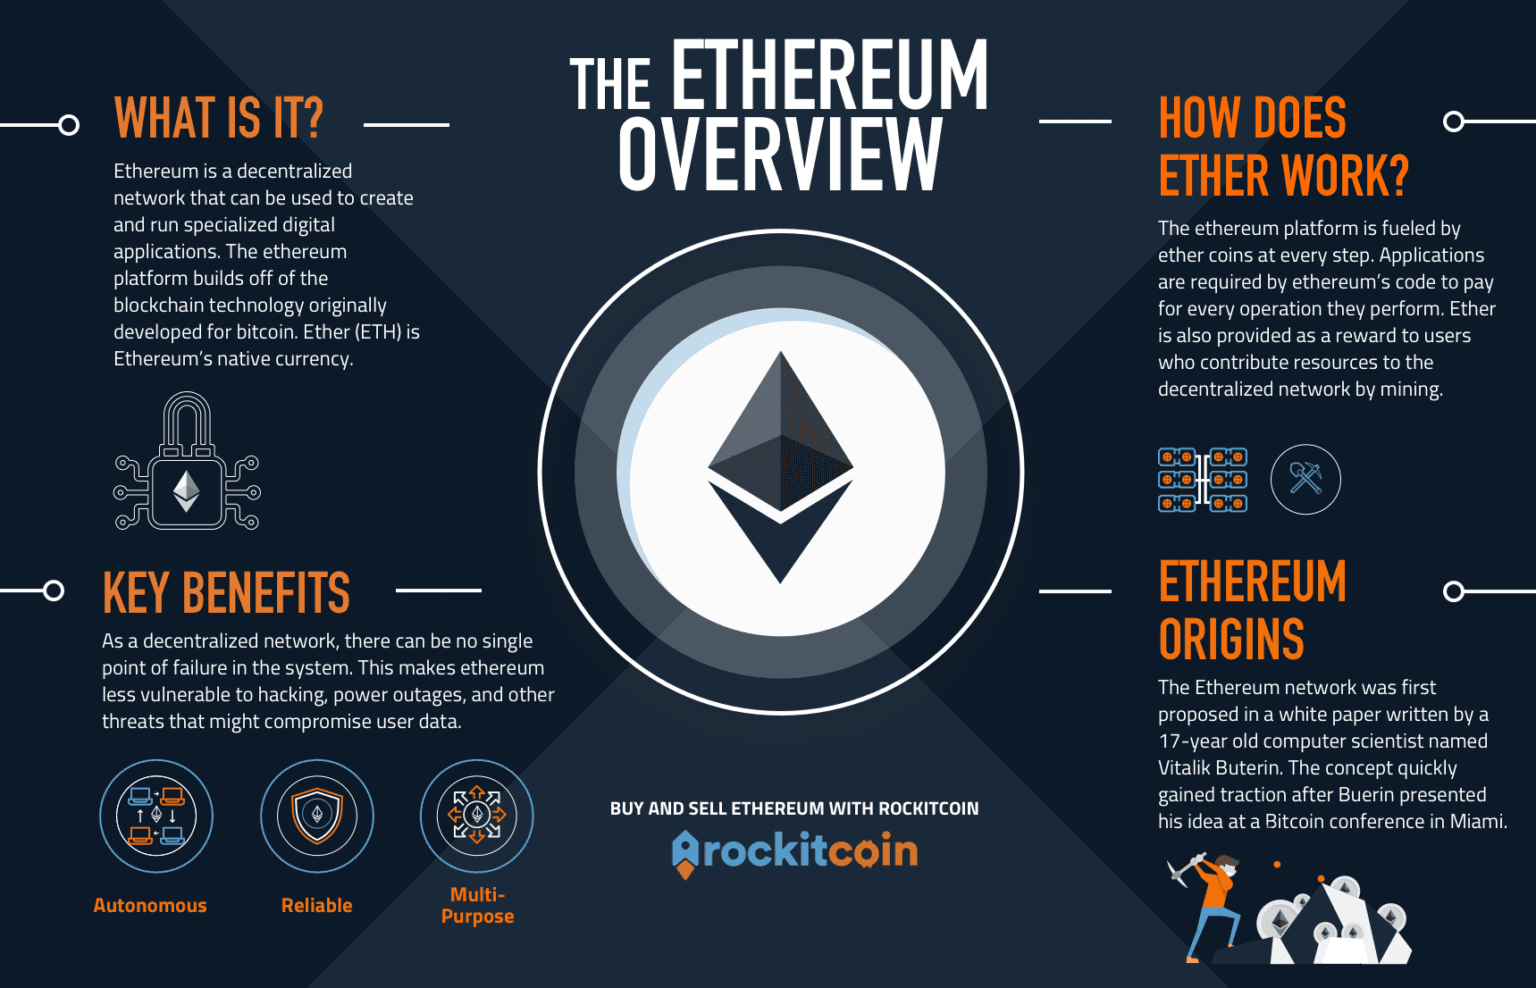 what flexibility does the ethereum platform allow